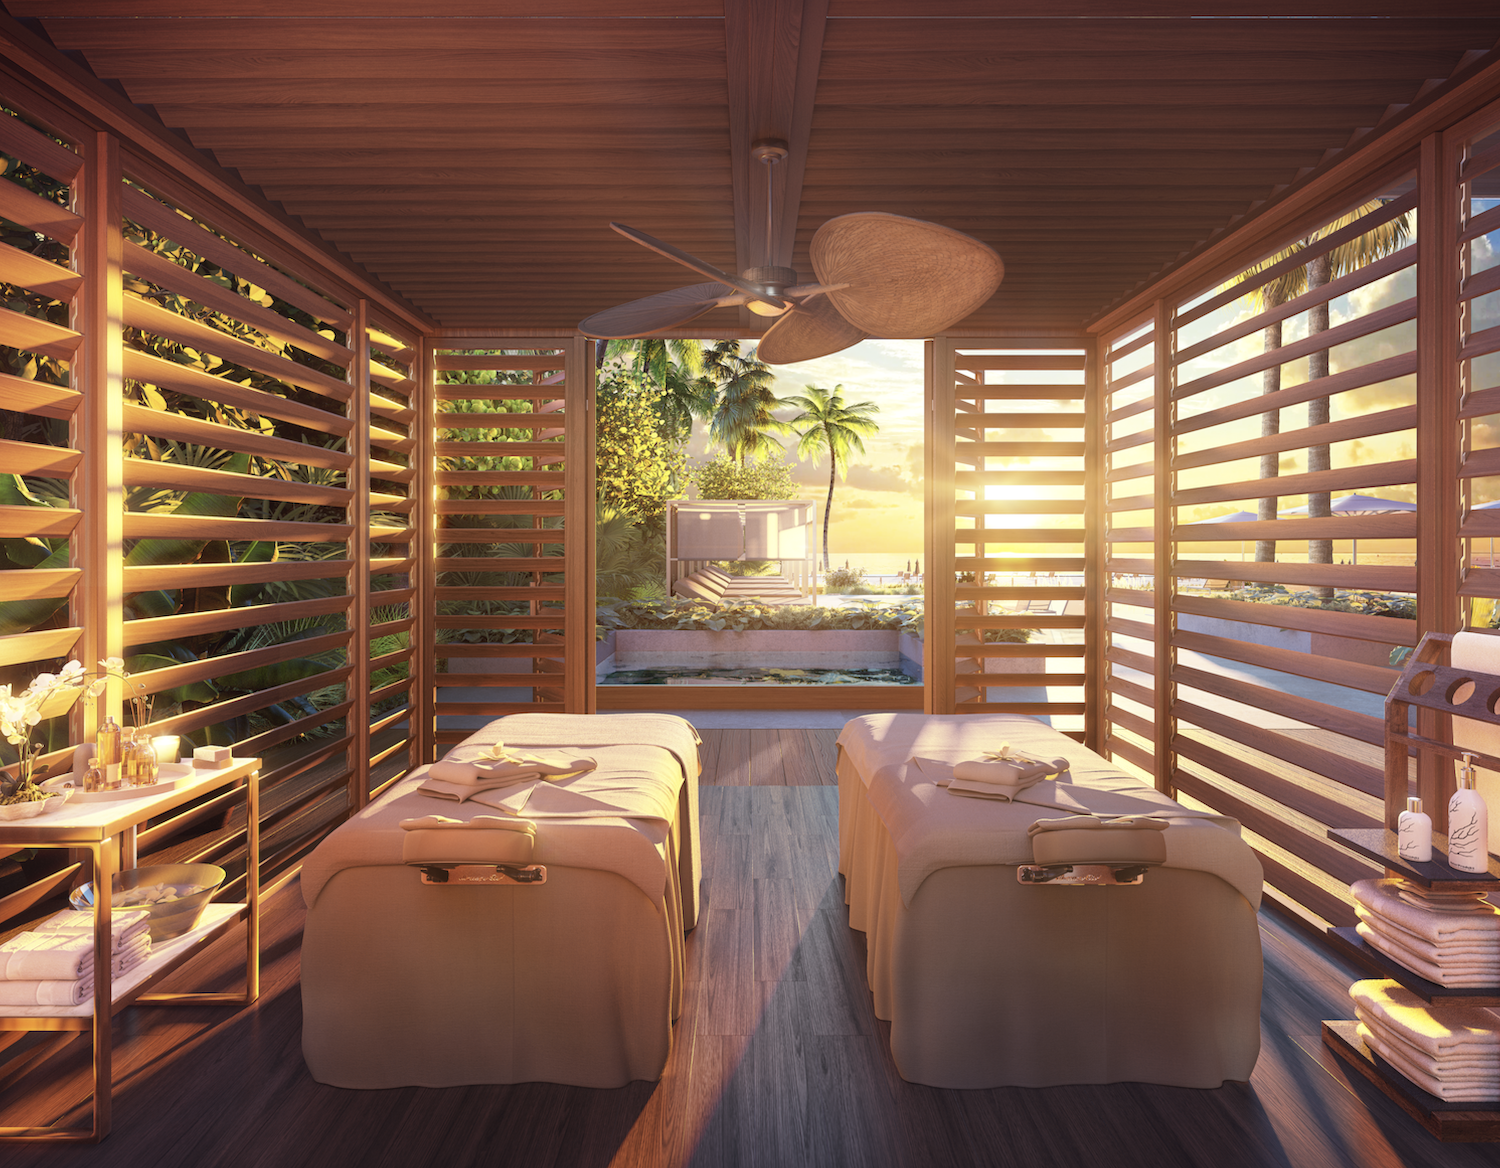 Outdoor treatment area. Rendering courtesy of DBOX.